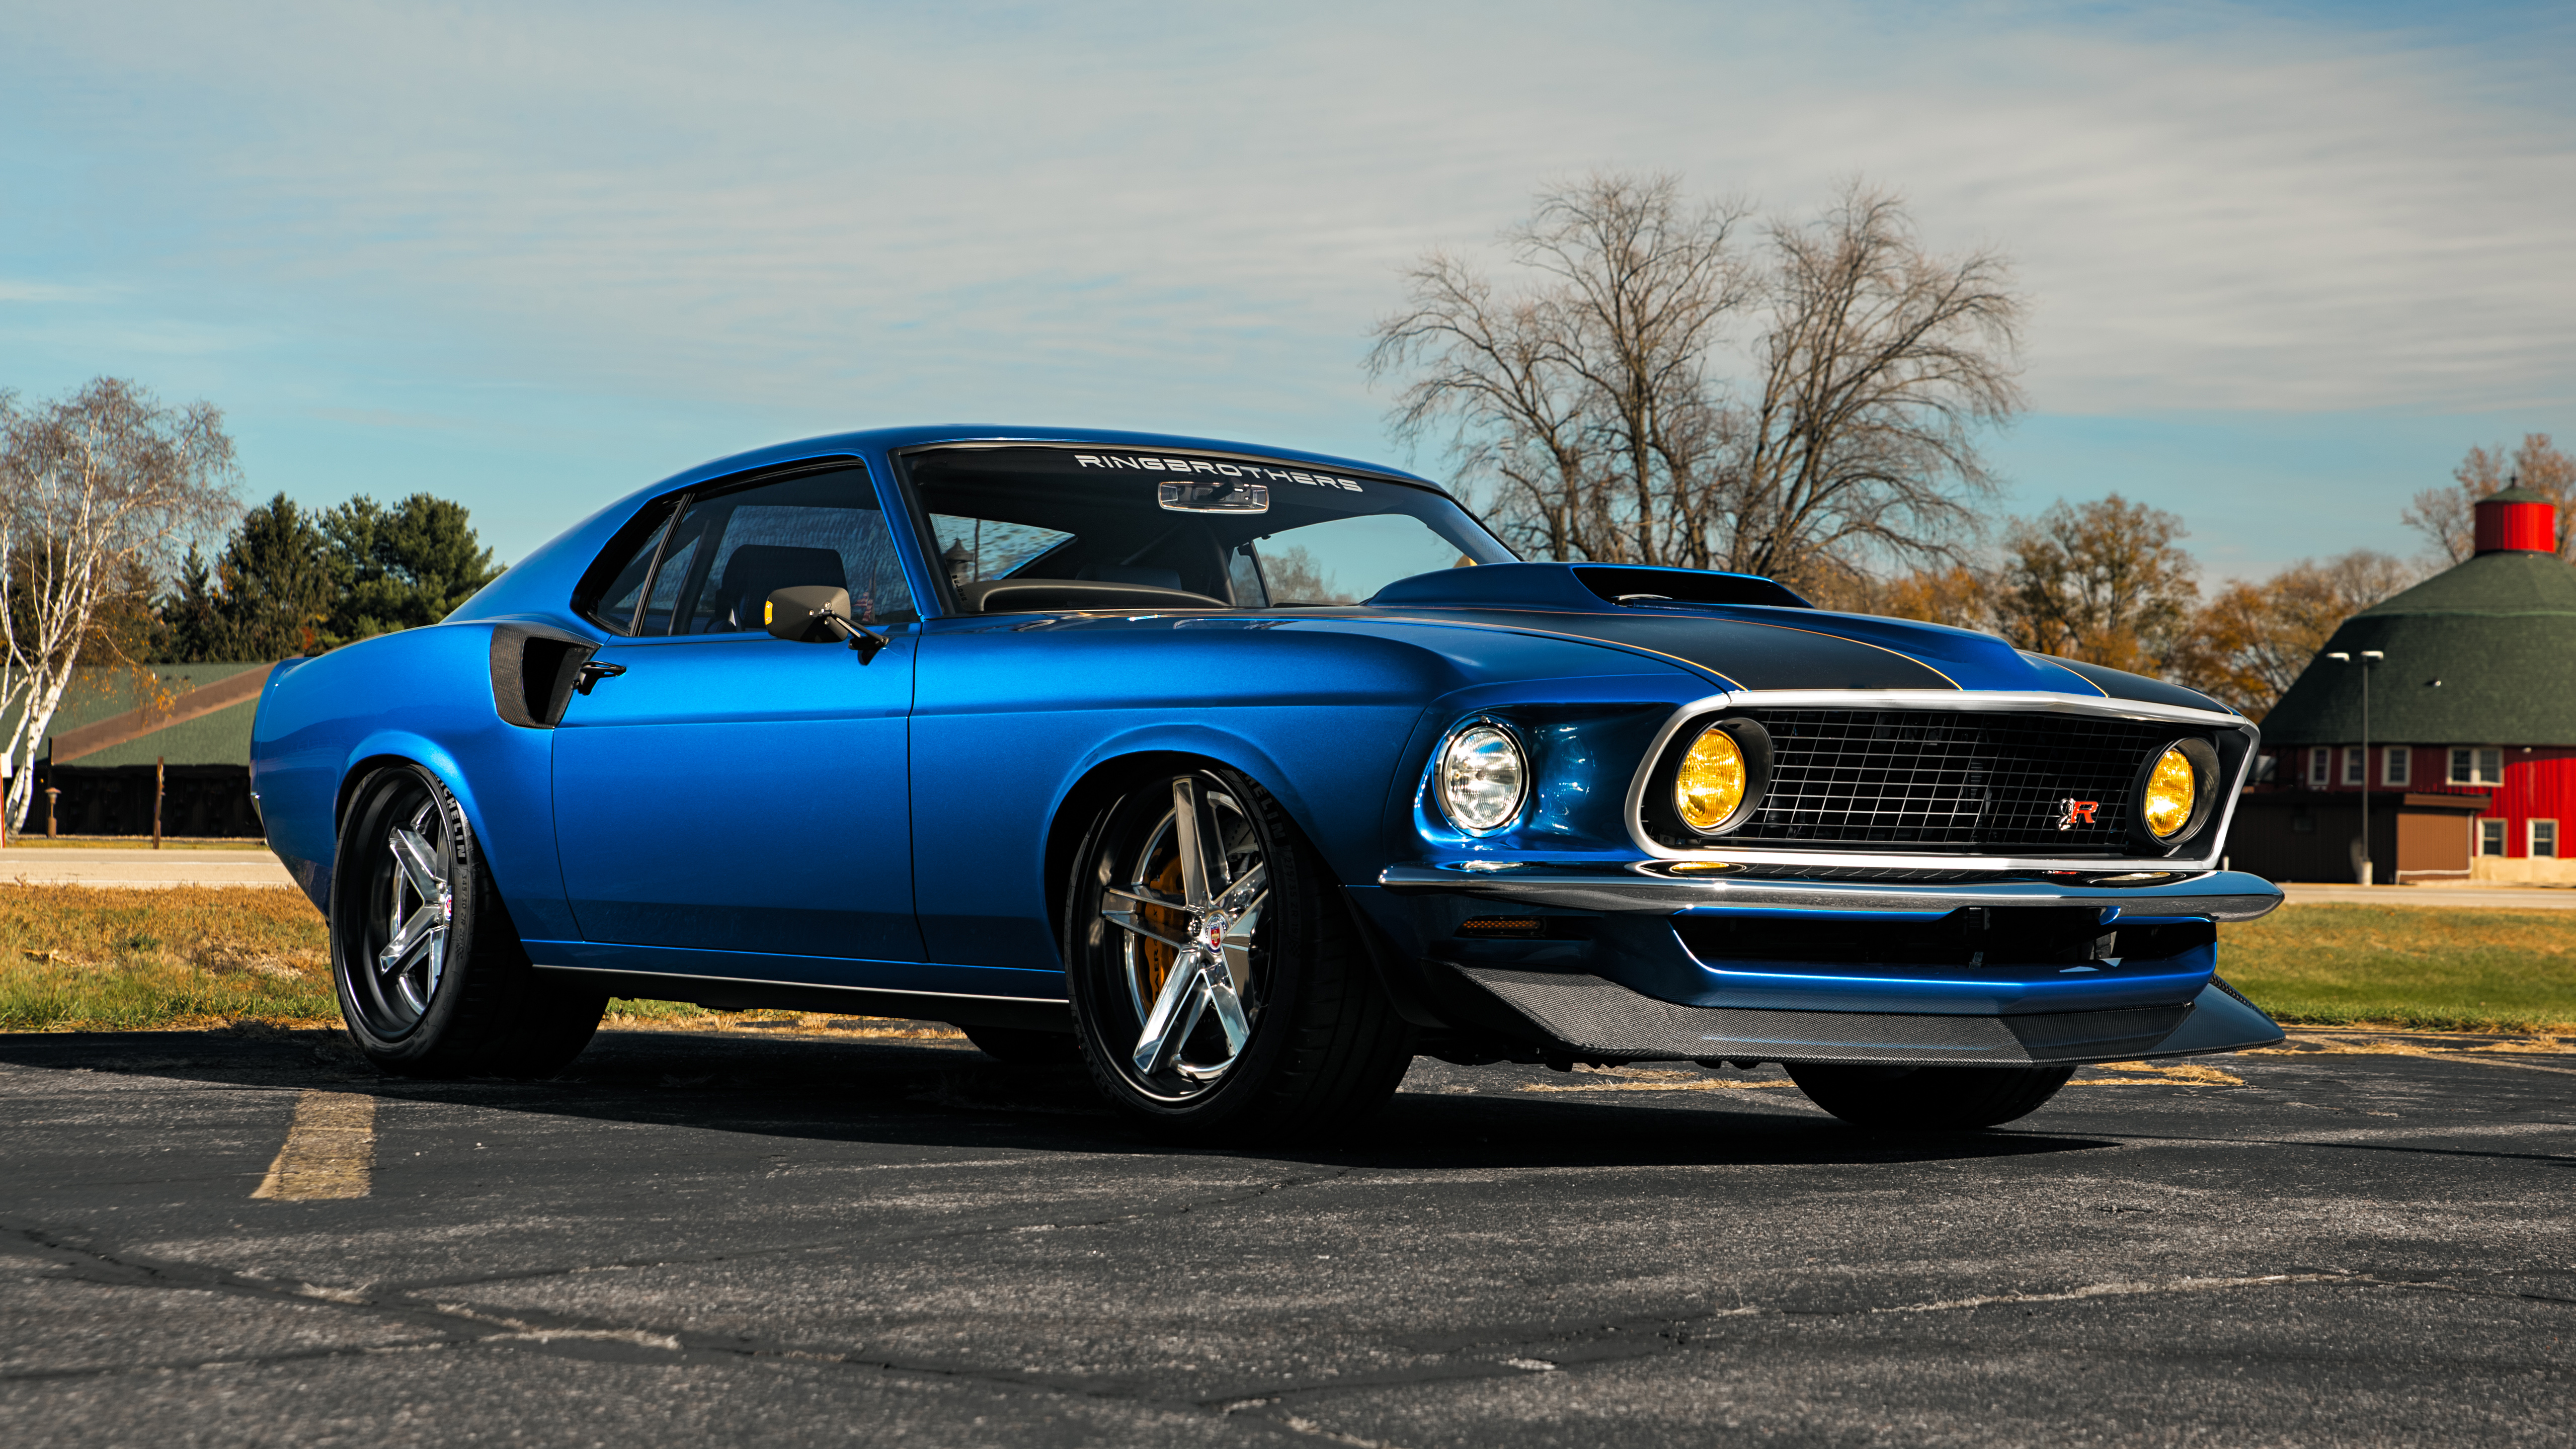 Ford Mustang 1969 Ford Ford Mustang Muscle Cars Blue Cars Car 5120x2880